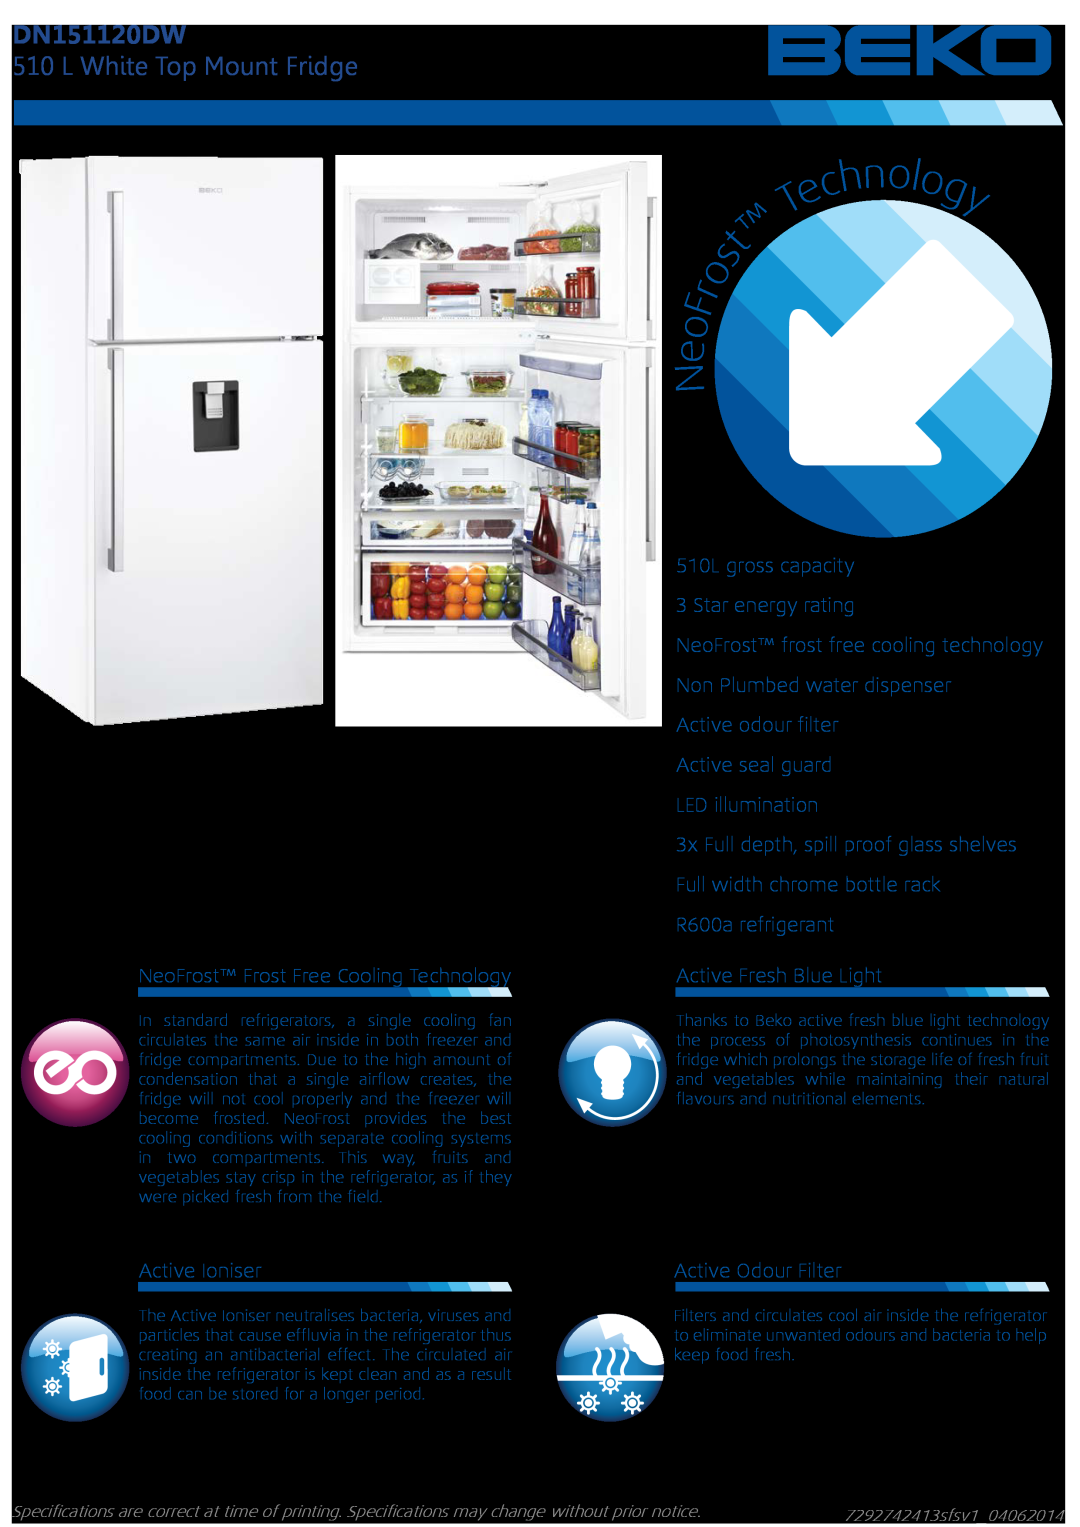 Beko DN151120DW L White Top Mount Fridge, NeoFrost Frost Free Cooling Technology, Active Ioniser, LED illumination 